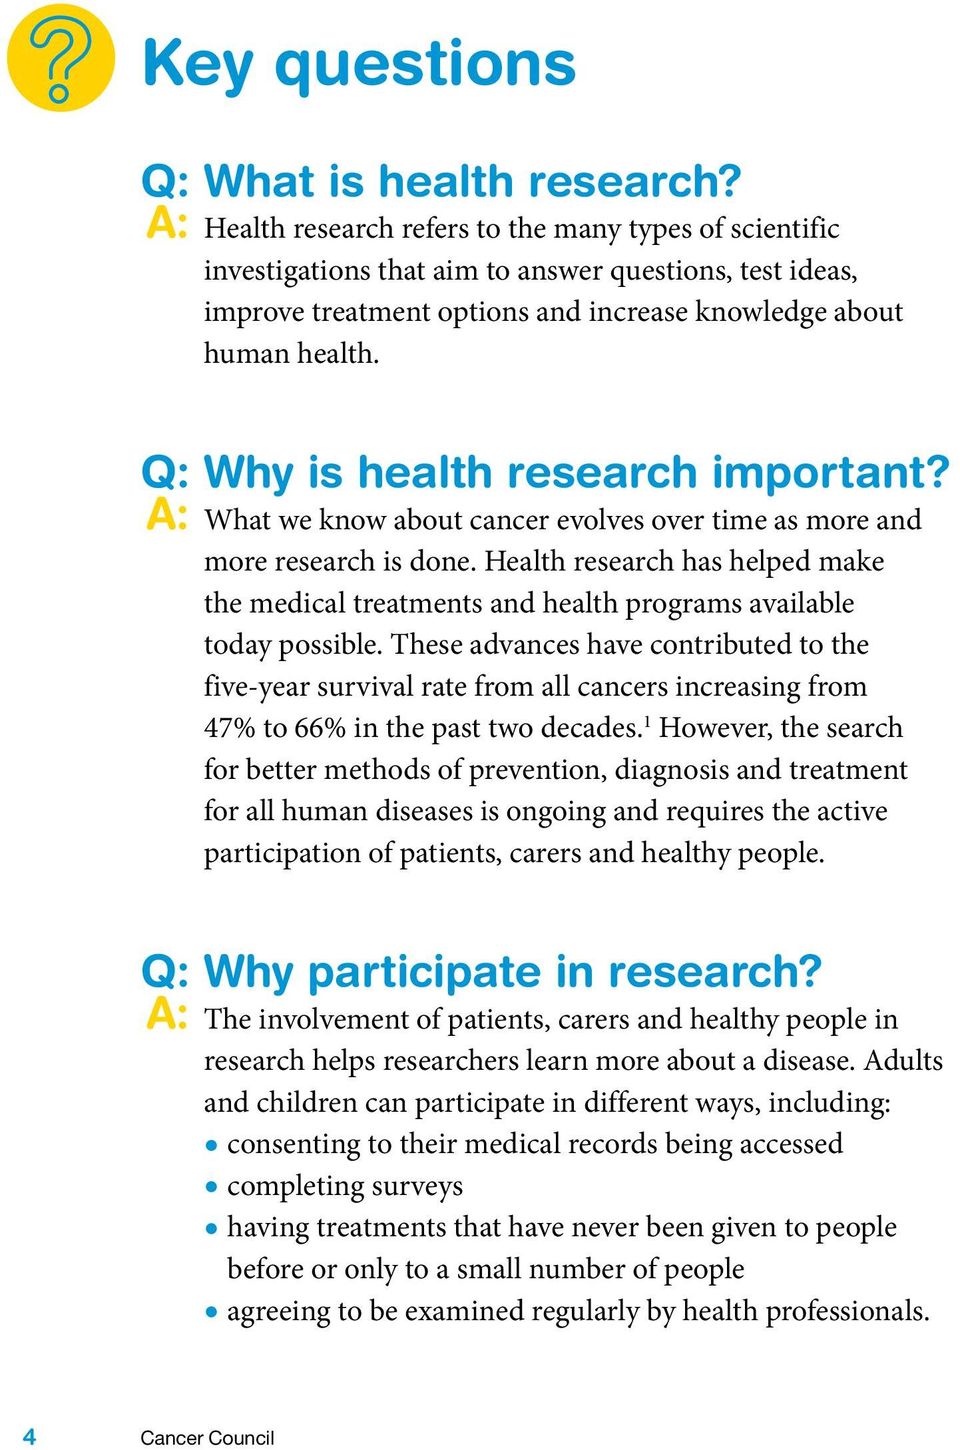 Q: Why is health research important? A: What we know about cancer evolves over time as more and more research is done.